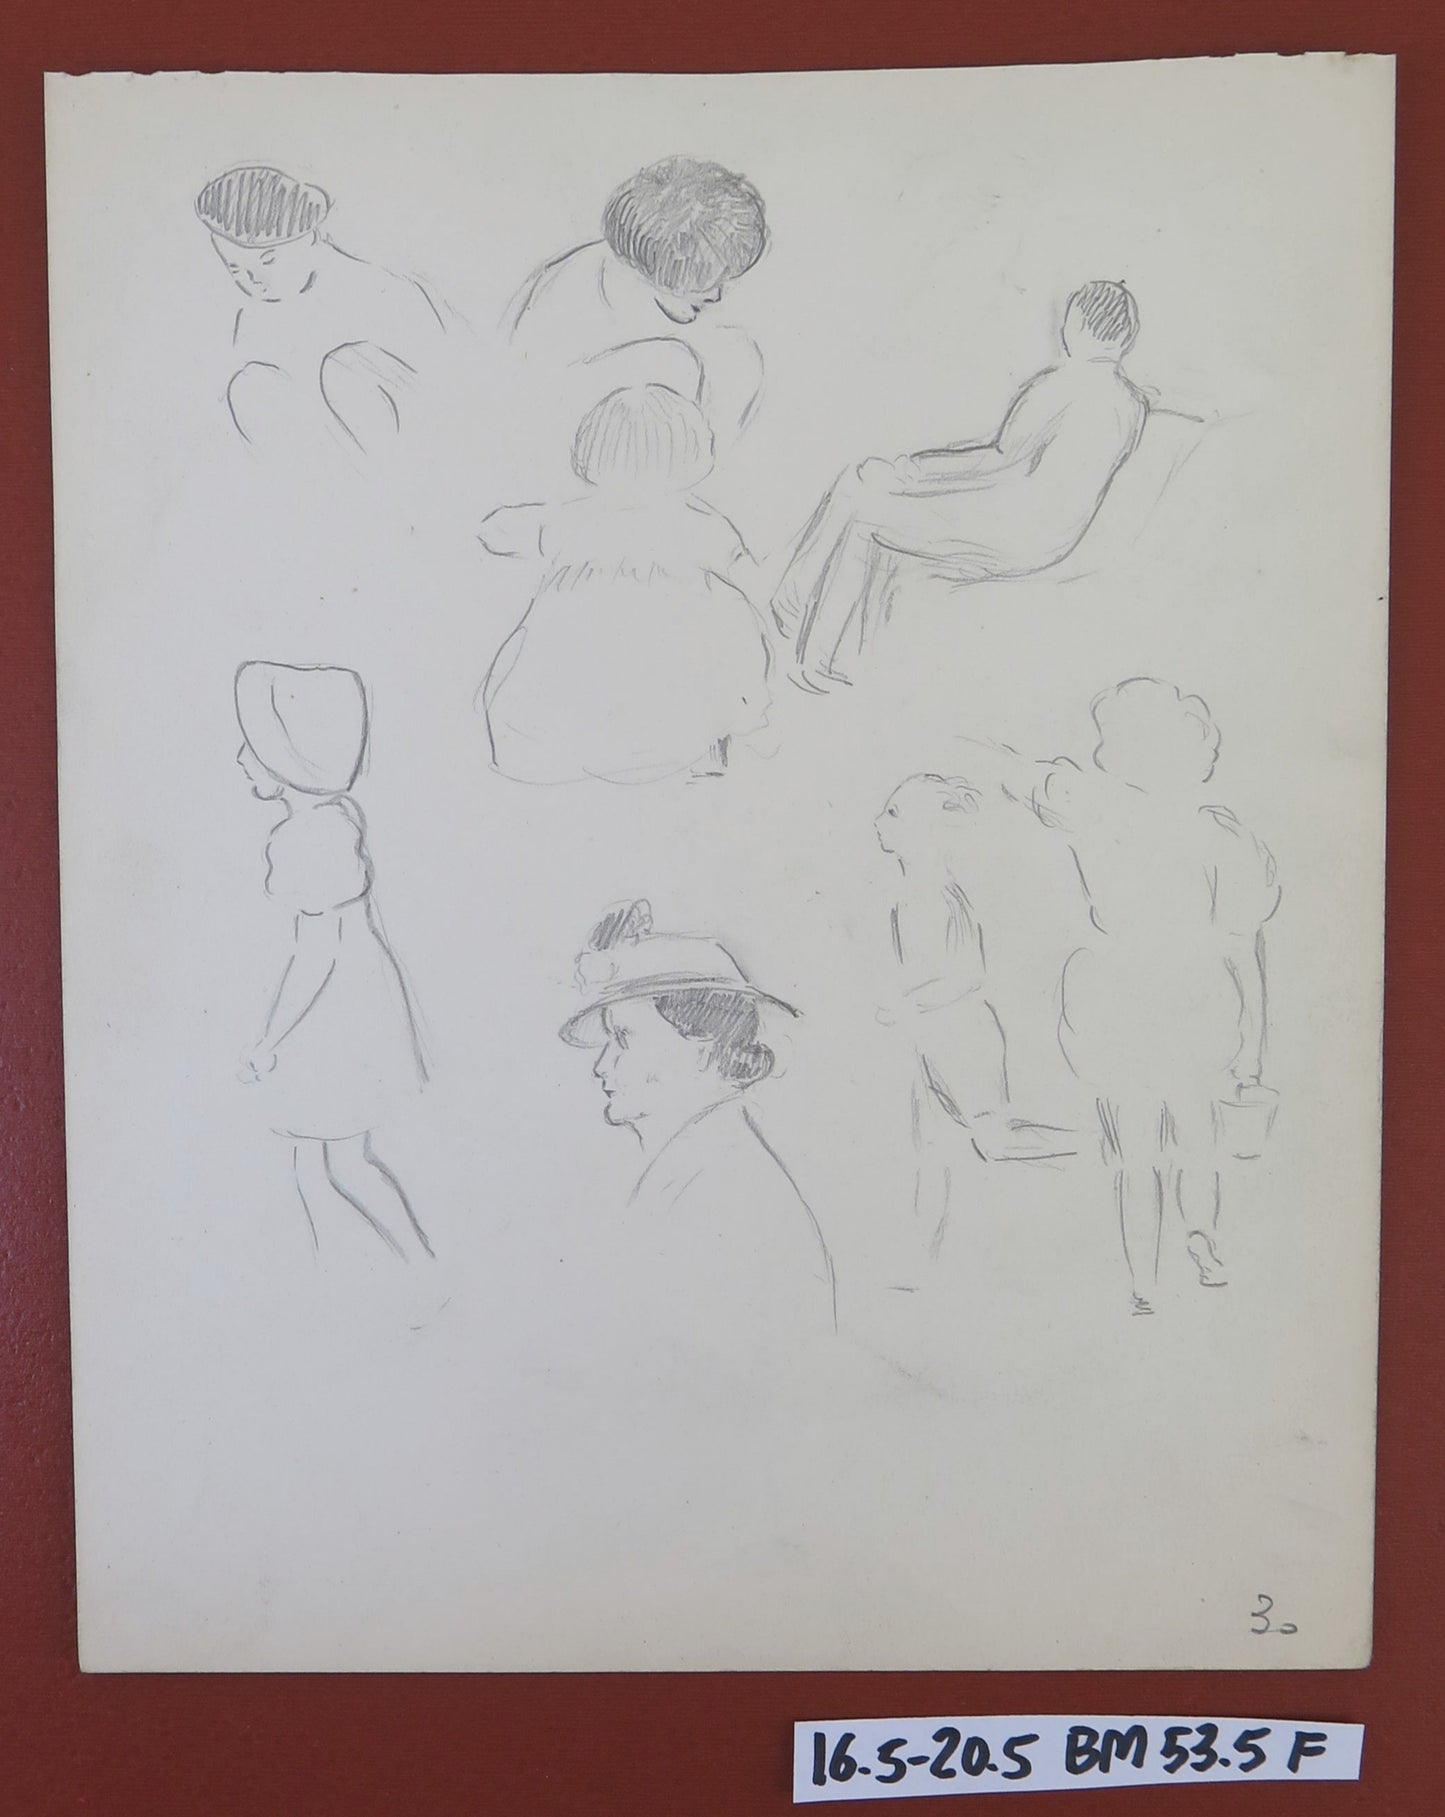 STUDY FOR HUMAN BODIES SKETCH ANTIQUE SKETCH PENCIL ON PAPER DRAWING BM53.5F